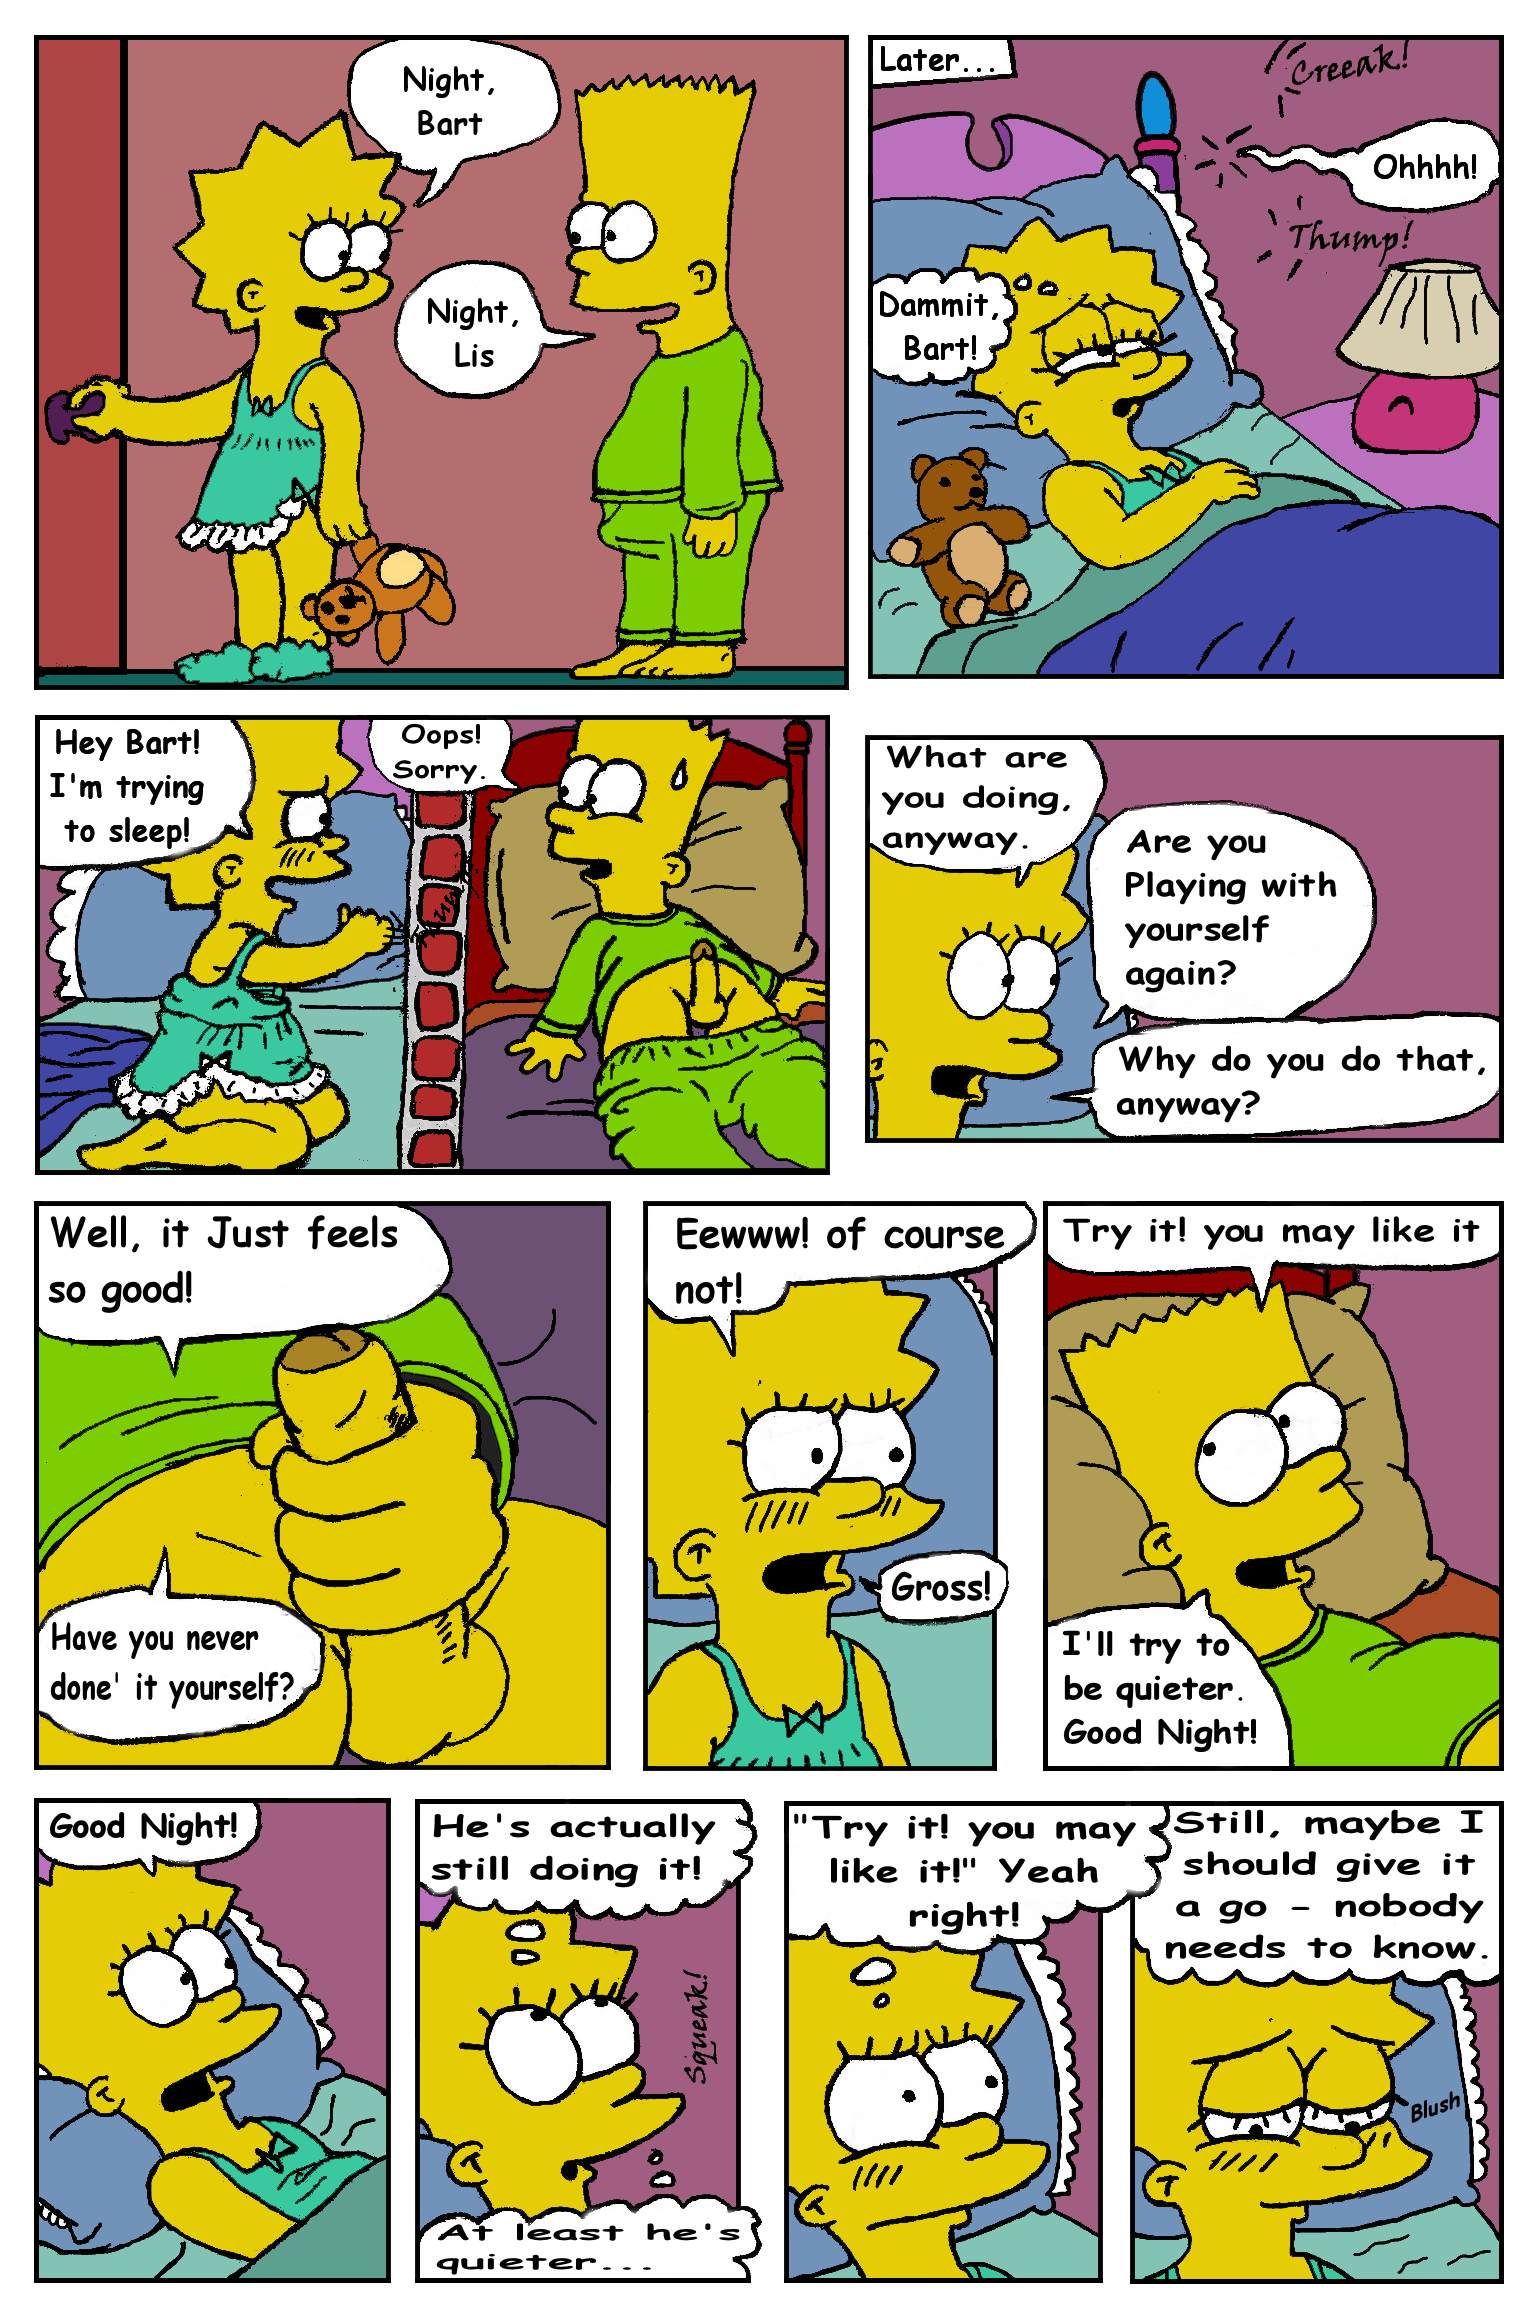 The Simpsons - Jimmy - Lisa's First Time.